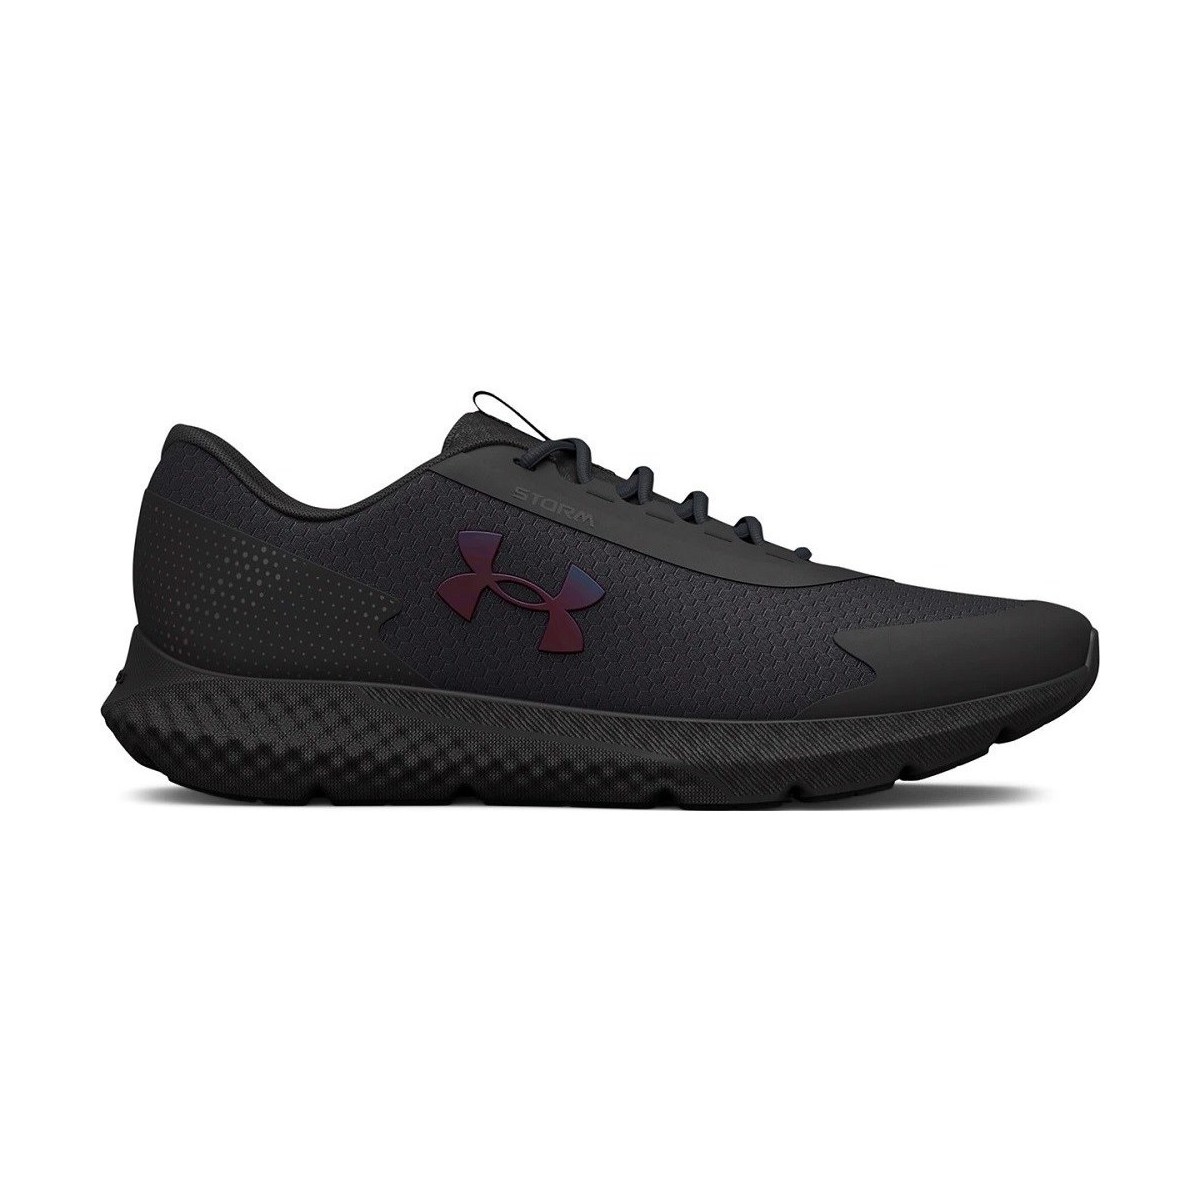 Under Armour Charged Rogue 3 Storm Black